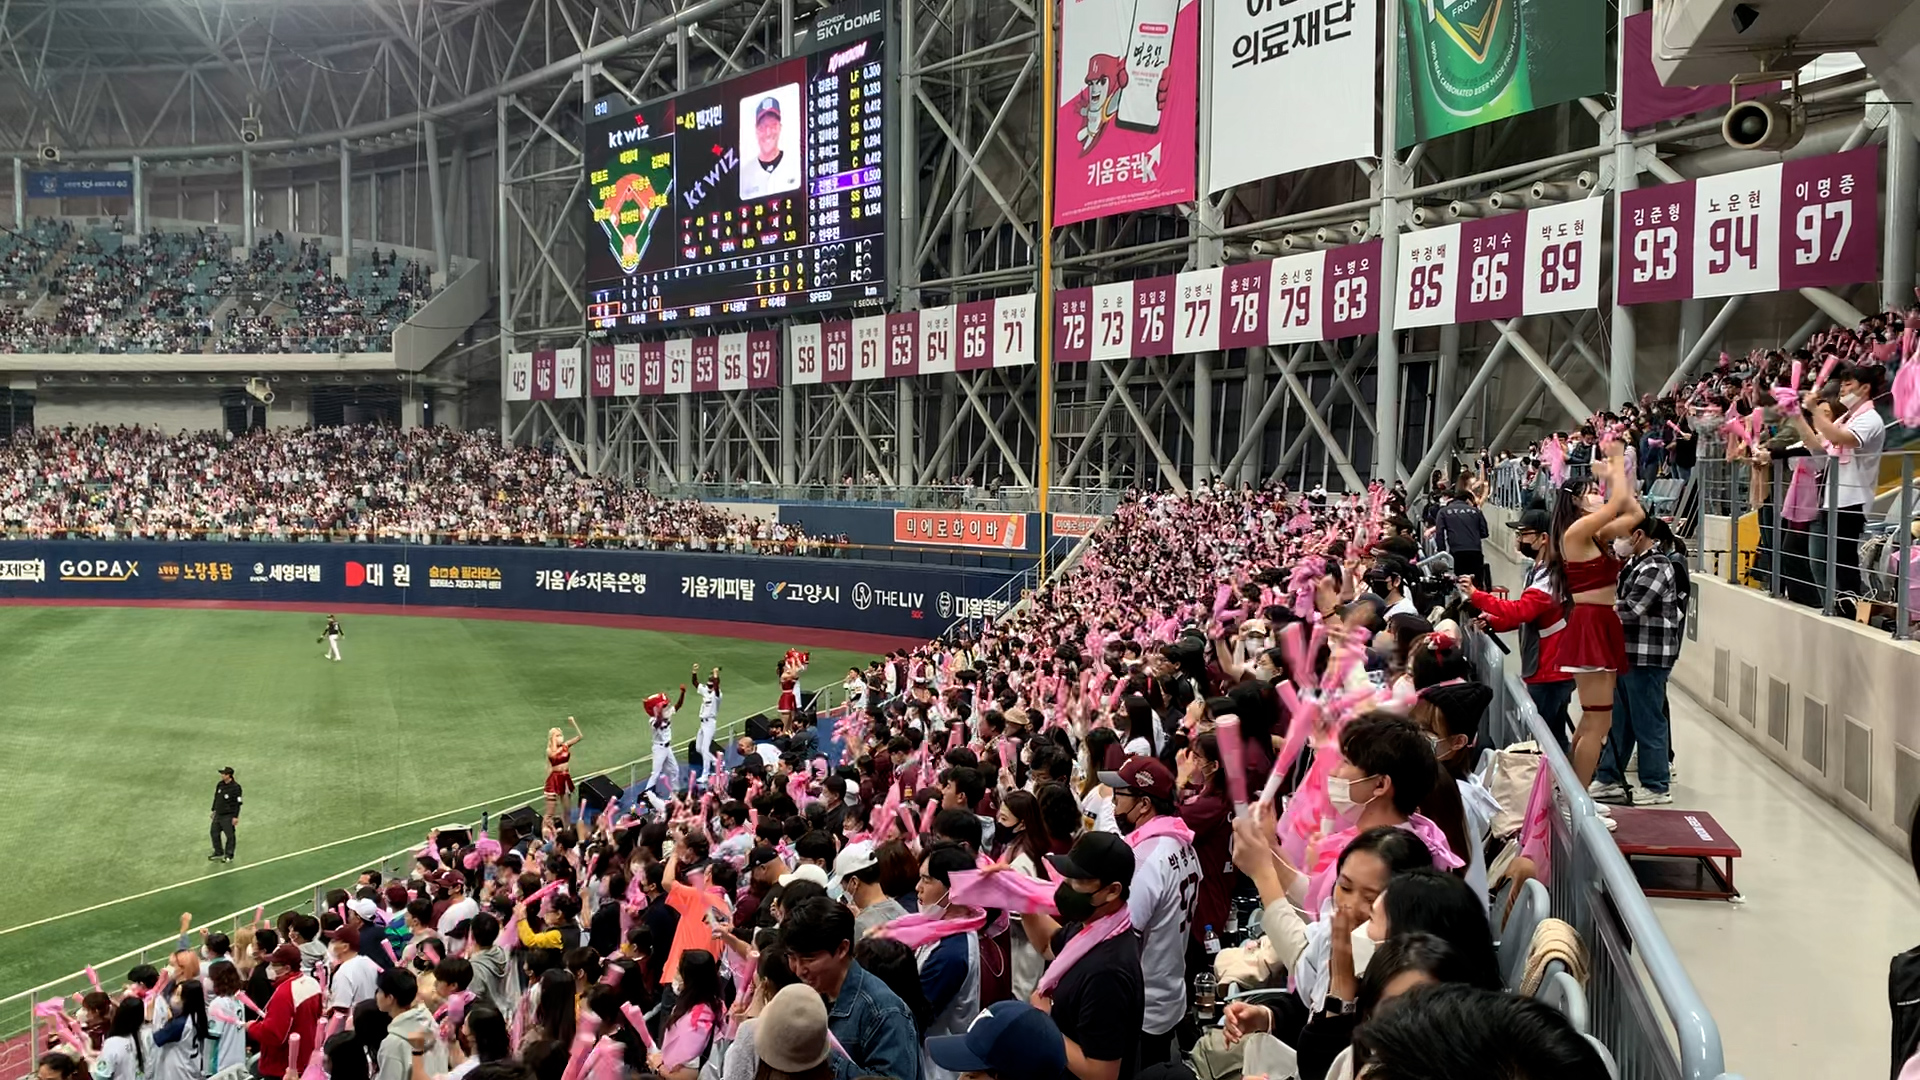 South Korean baseball gives fans 9 innings of cheers, songs and dances -  The Washington Post